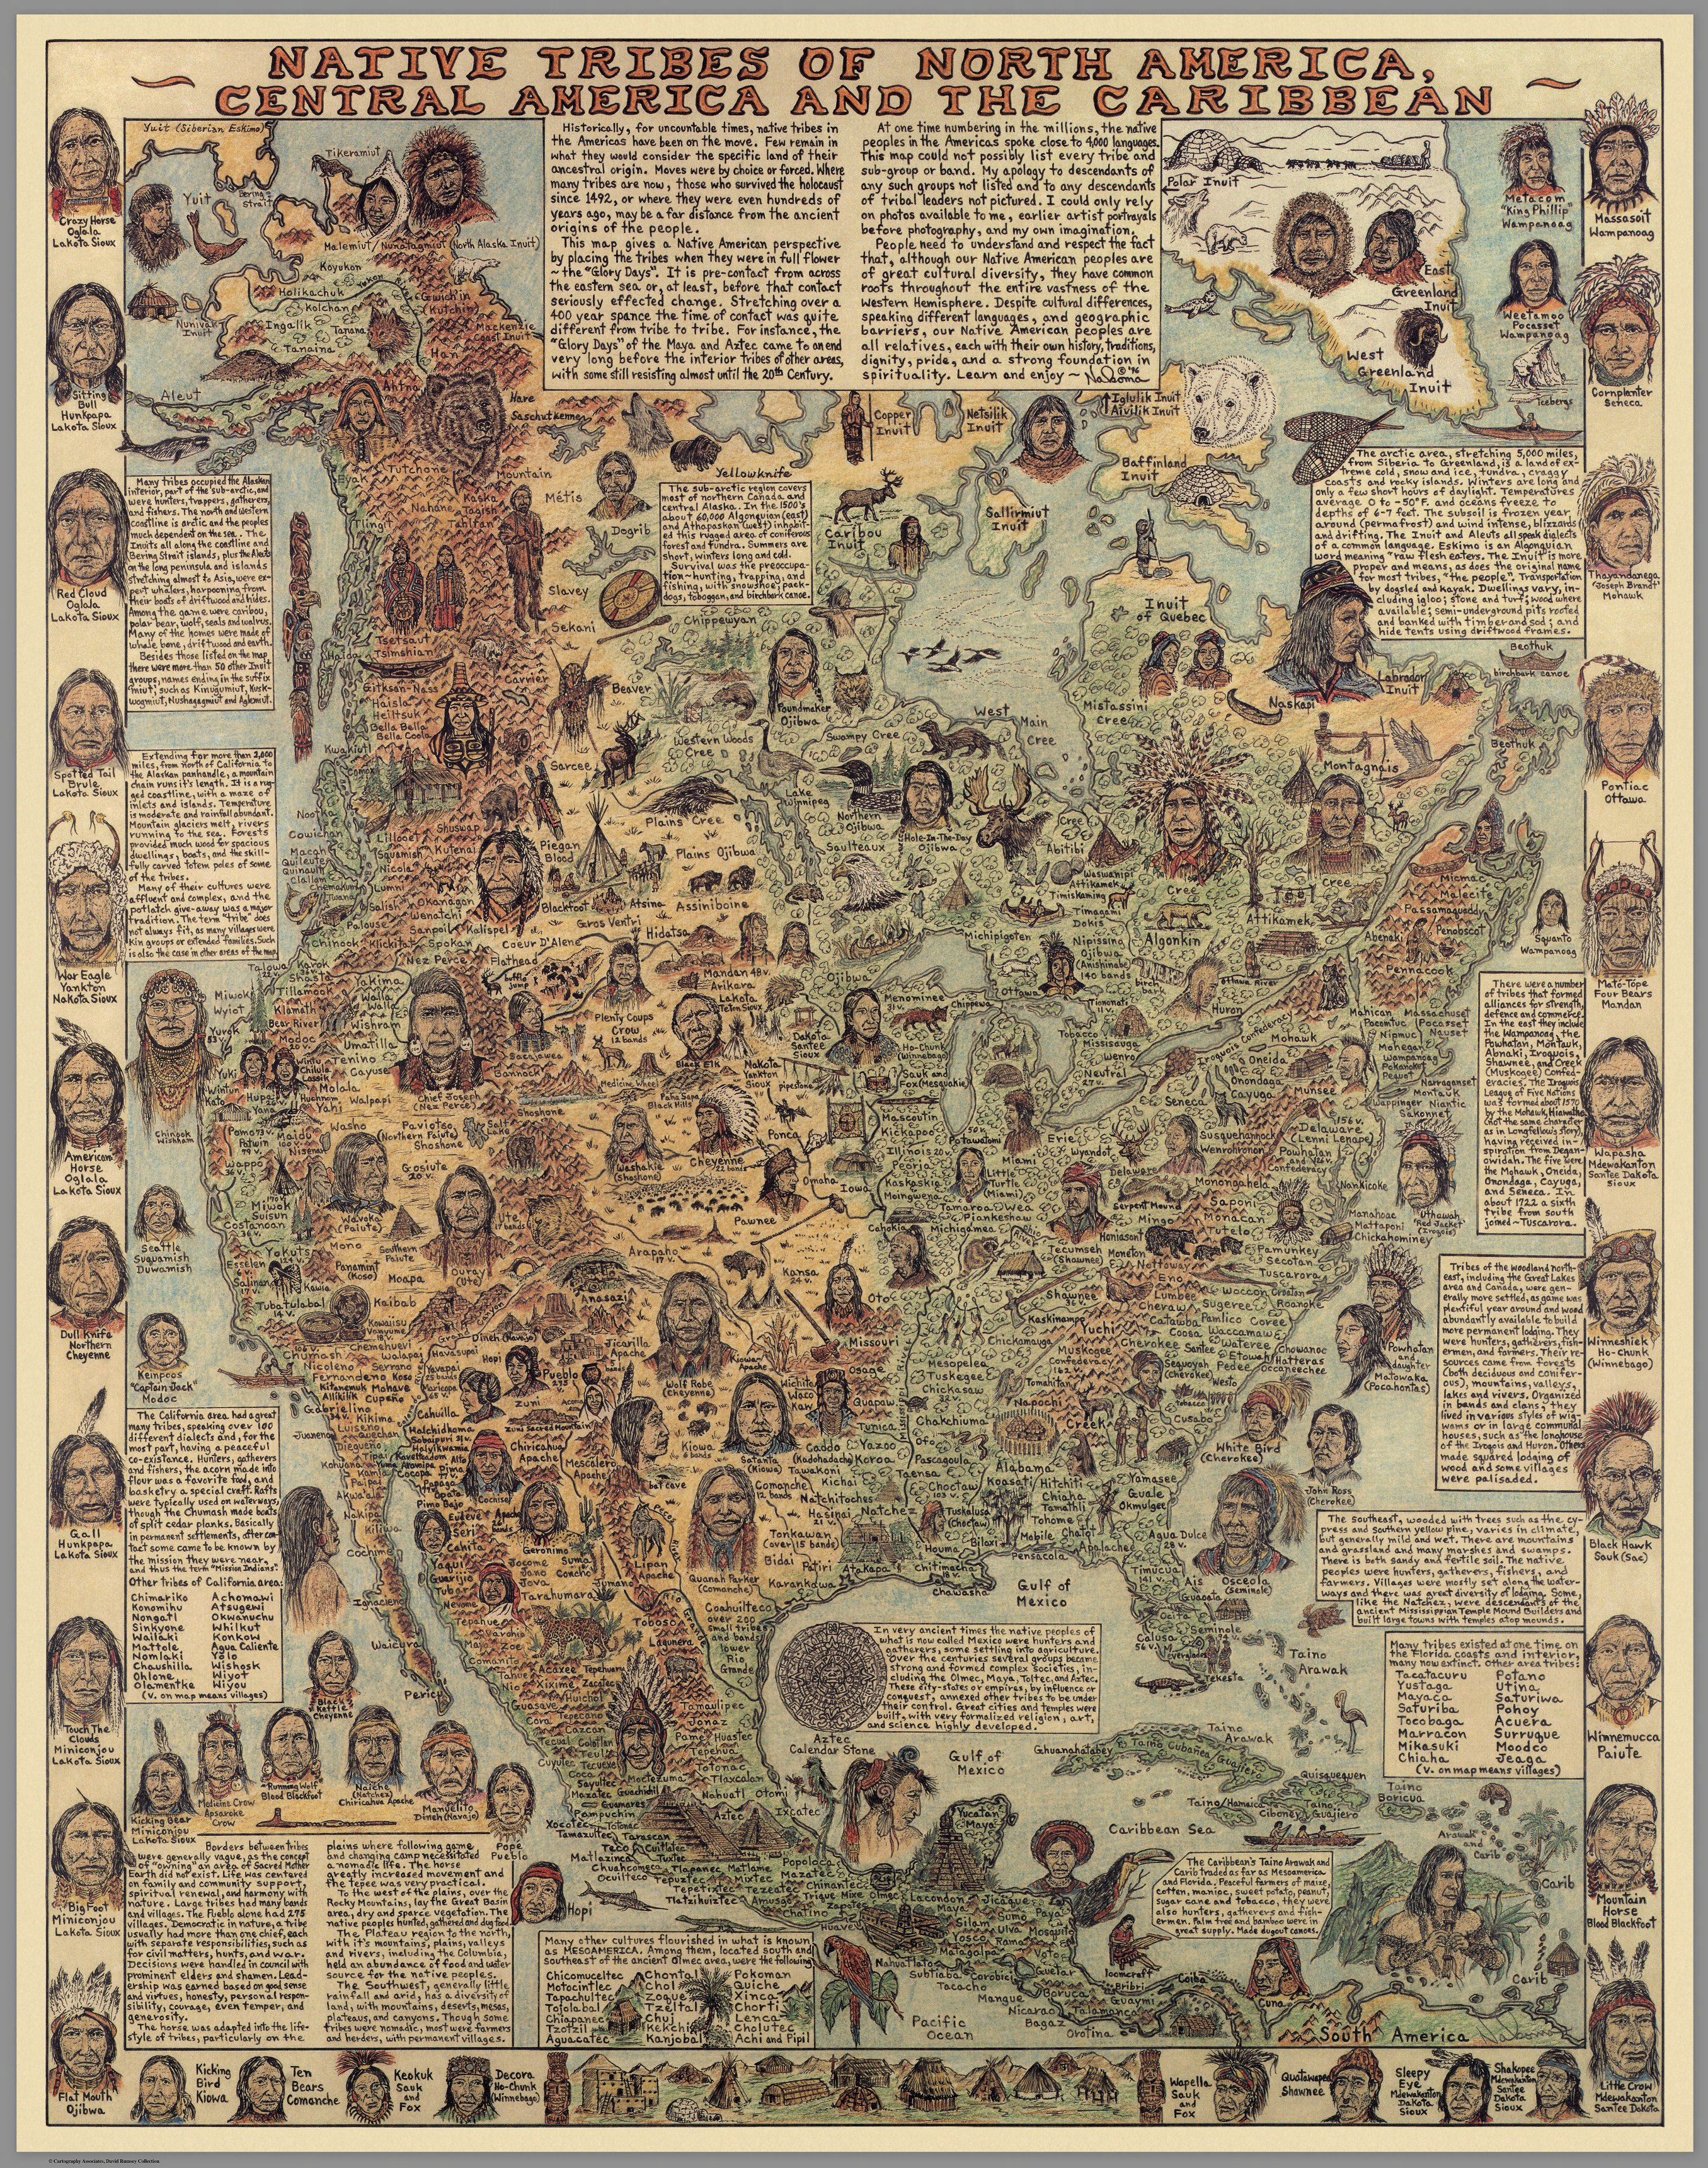 Indians of North America, Native Americans map, Indian tribes across